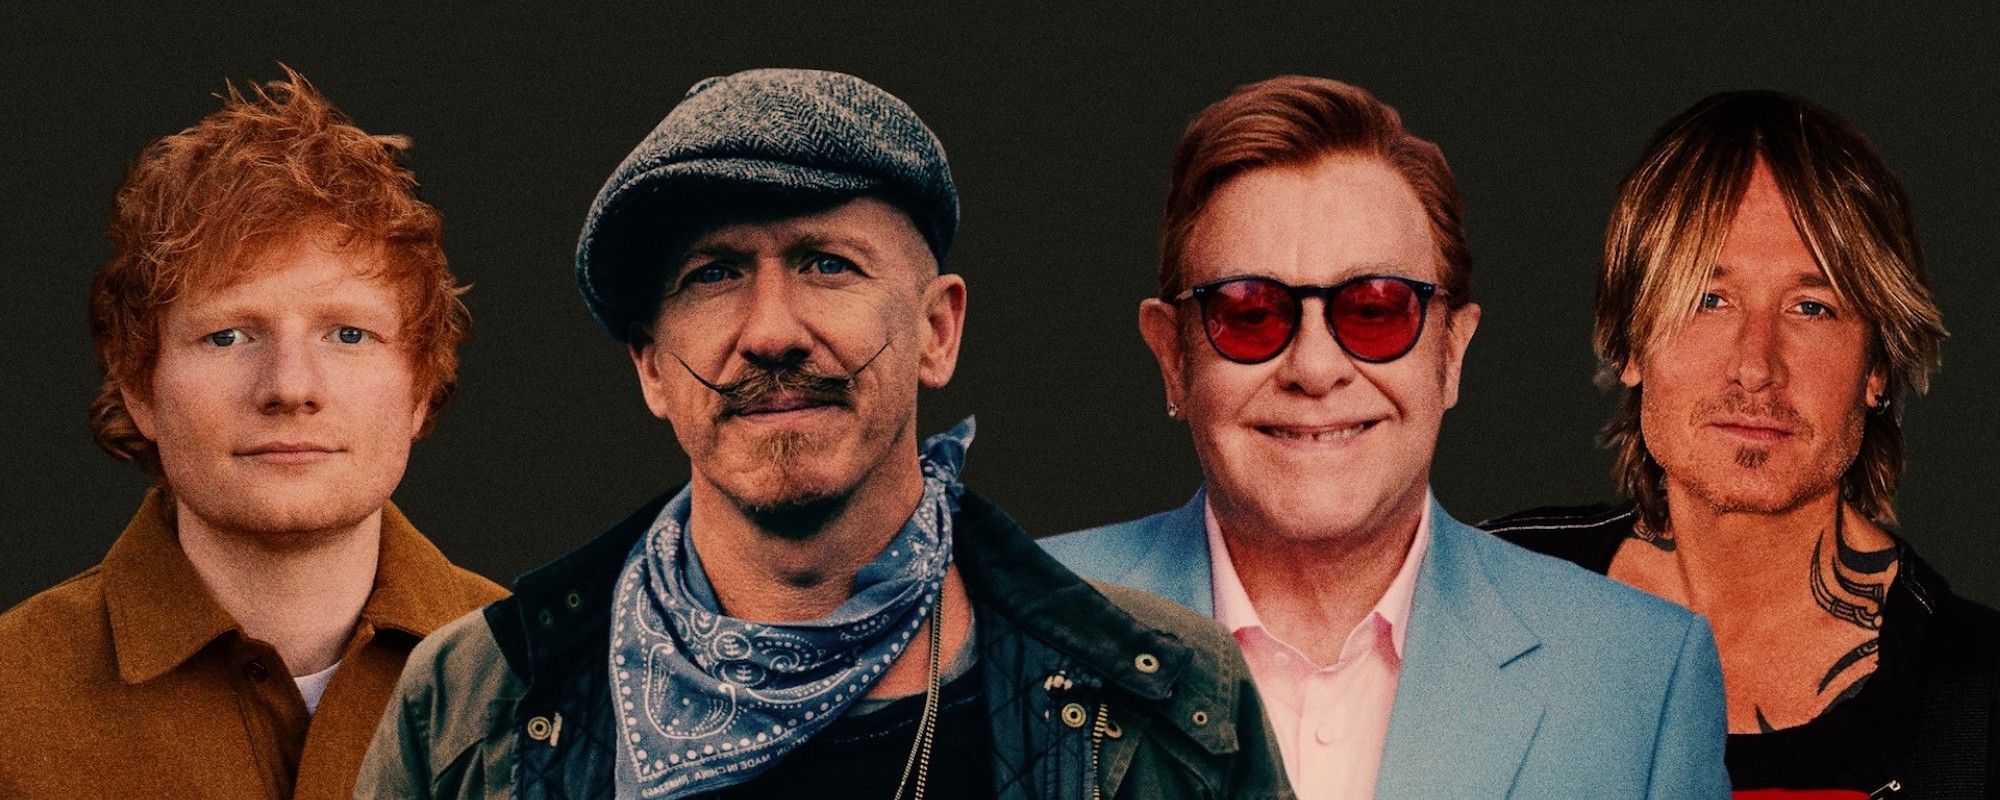 Elton John, Keith Urban and Ed Sheeran Join Foy Vance for Anthemic Anniversary Version of “Guiding Light”